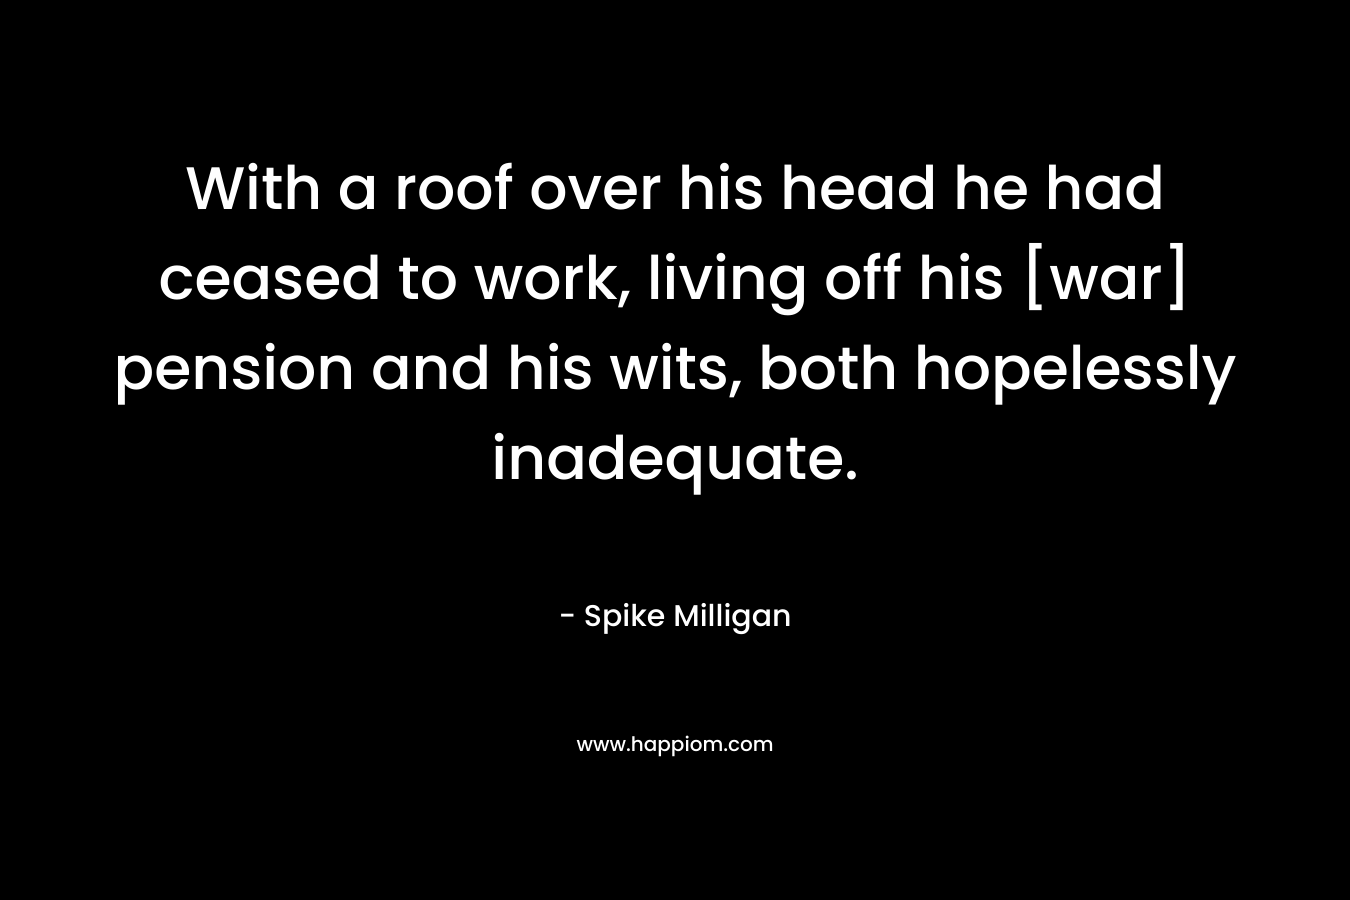 With a roof over his head he had ceased to work, living off his [war] pension and his wits, both hopelessly inadequate. – Spike Milligan